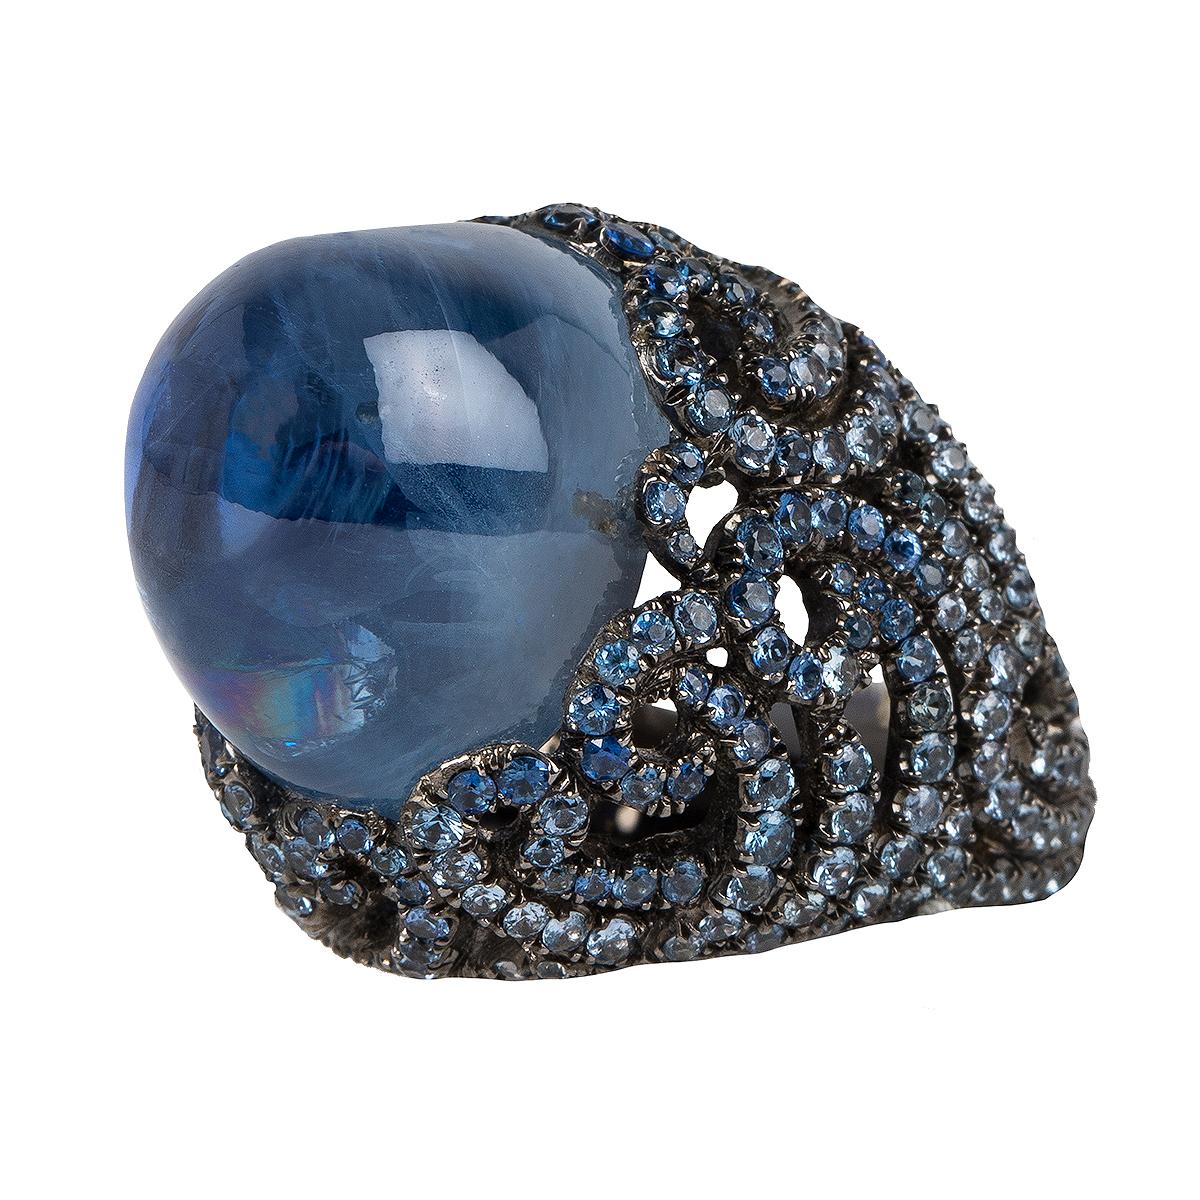 This sapphire is appx 28 carat and originates from Sri Lanka.
This cabochon stone is surrounded by round sapphire stones in an elaborate setting.
This sapphire stone is a medium blue color and is a natural unheated sapphire. 
The ring is set into